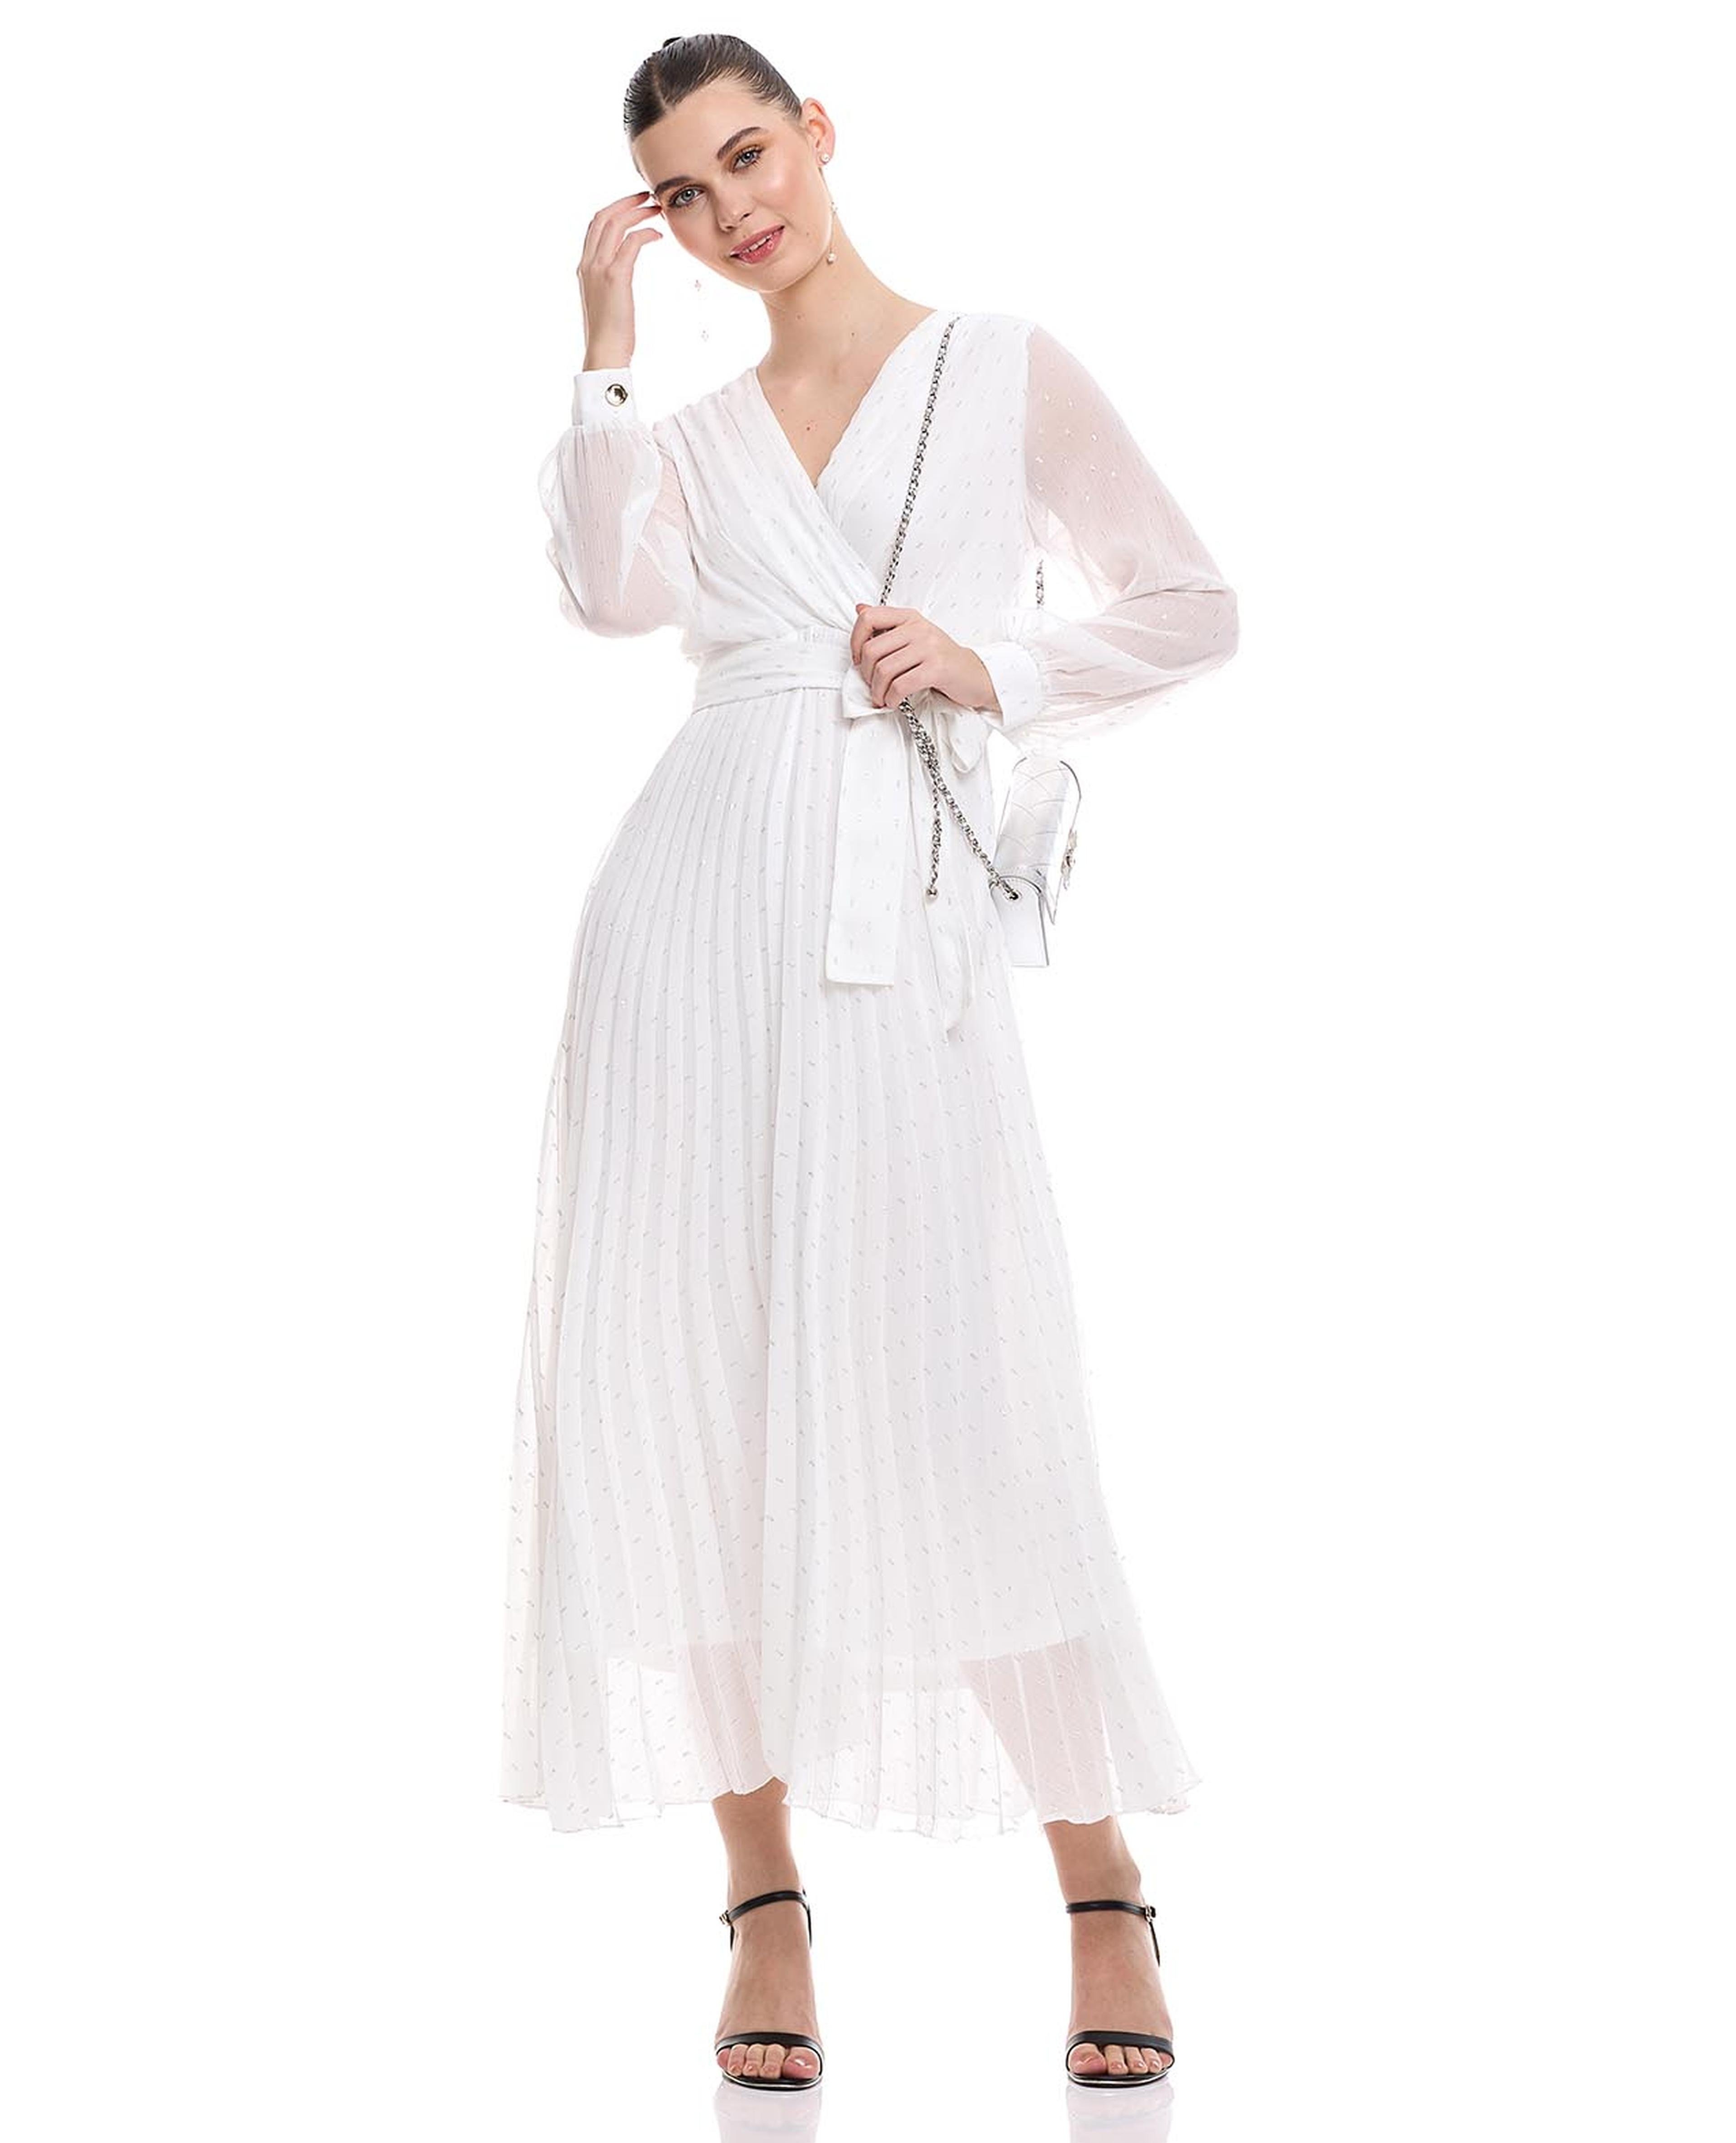 Self Patterned Midaxi Dress with V-Neck and Long Sleeves